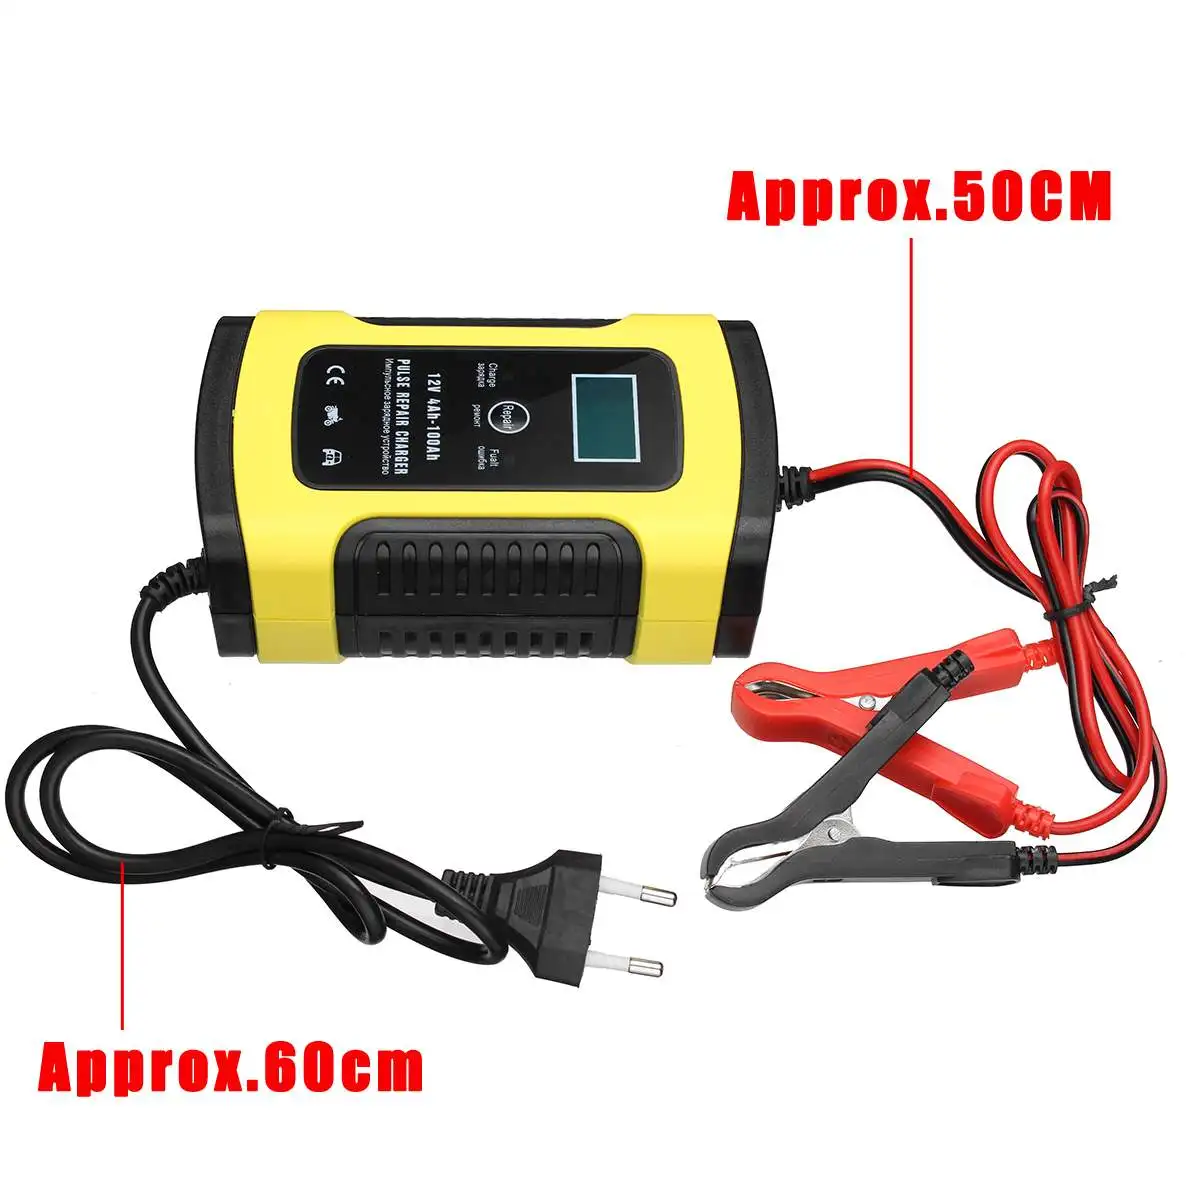 12v 5a lcd smart fast car battery charger for auto motorcycle lead acid agm gel batteries intelligent charging 12 v volt 5 a amp free global shipping